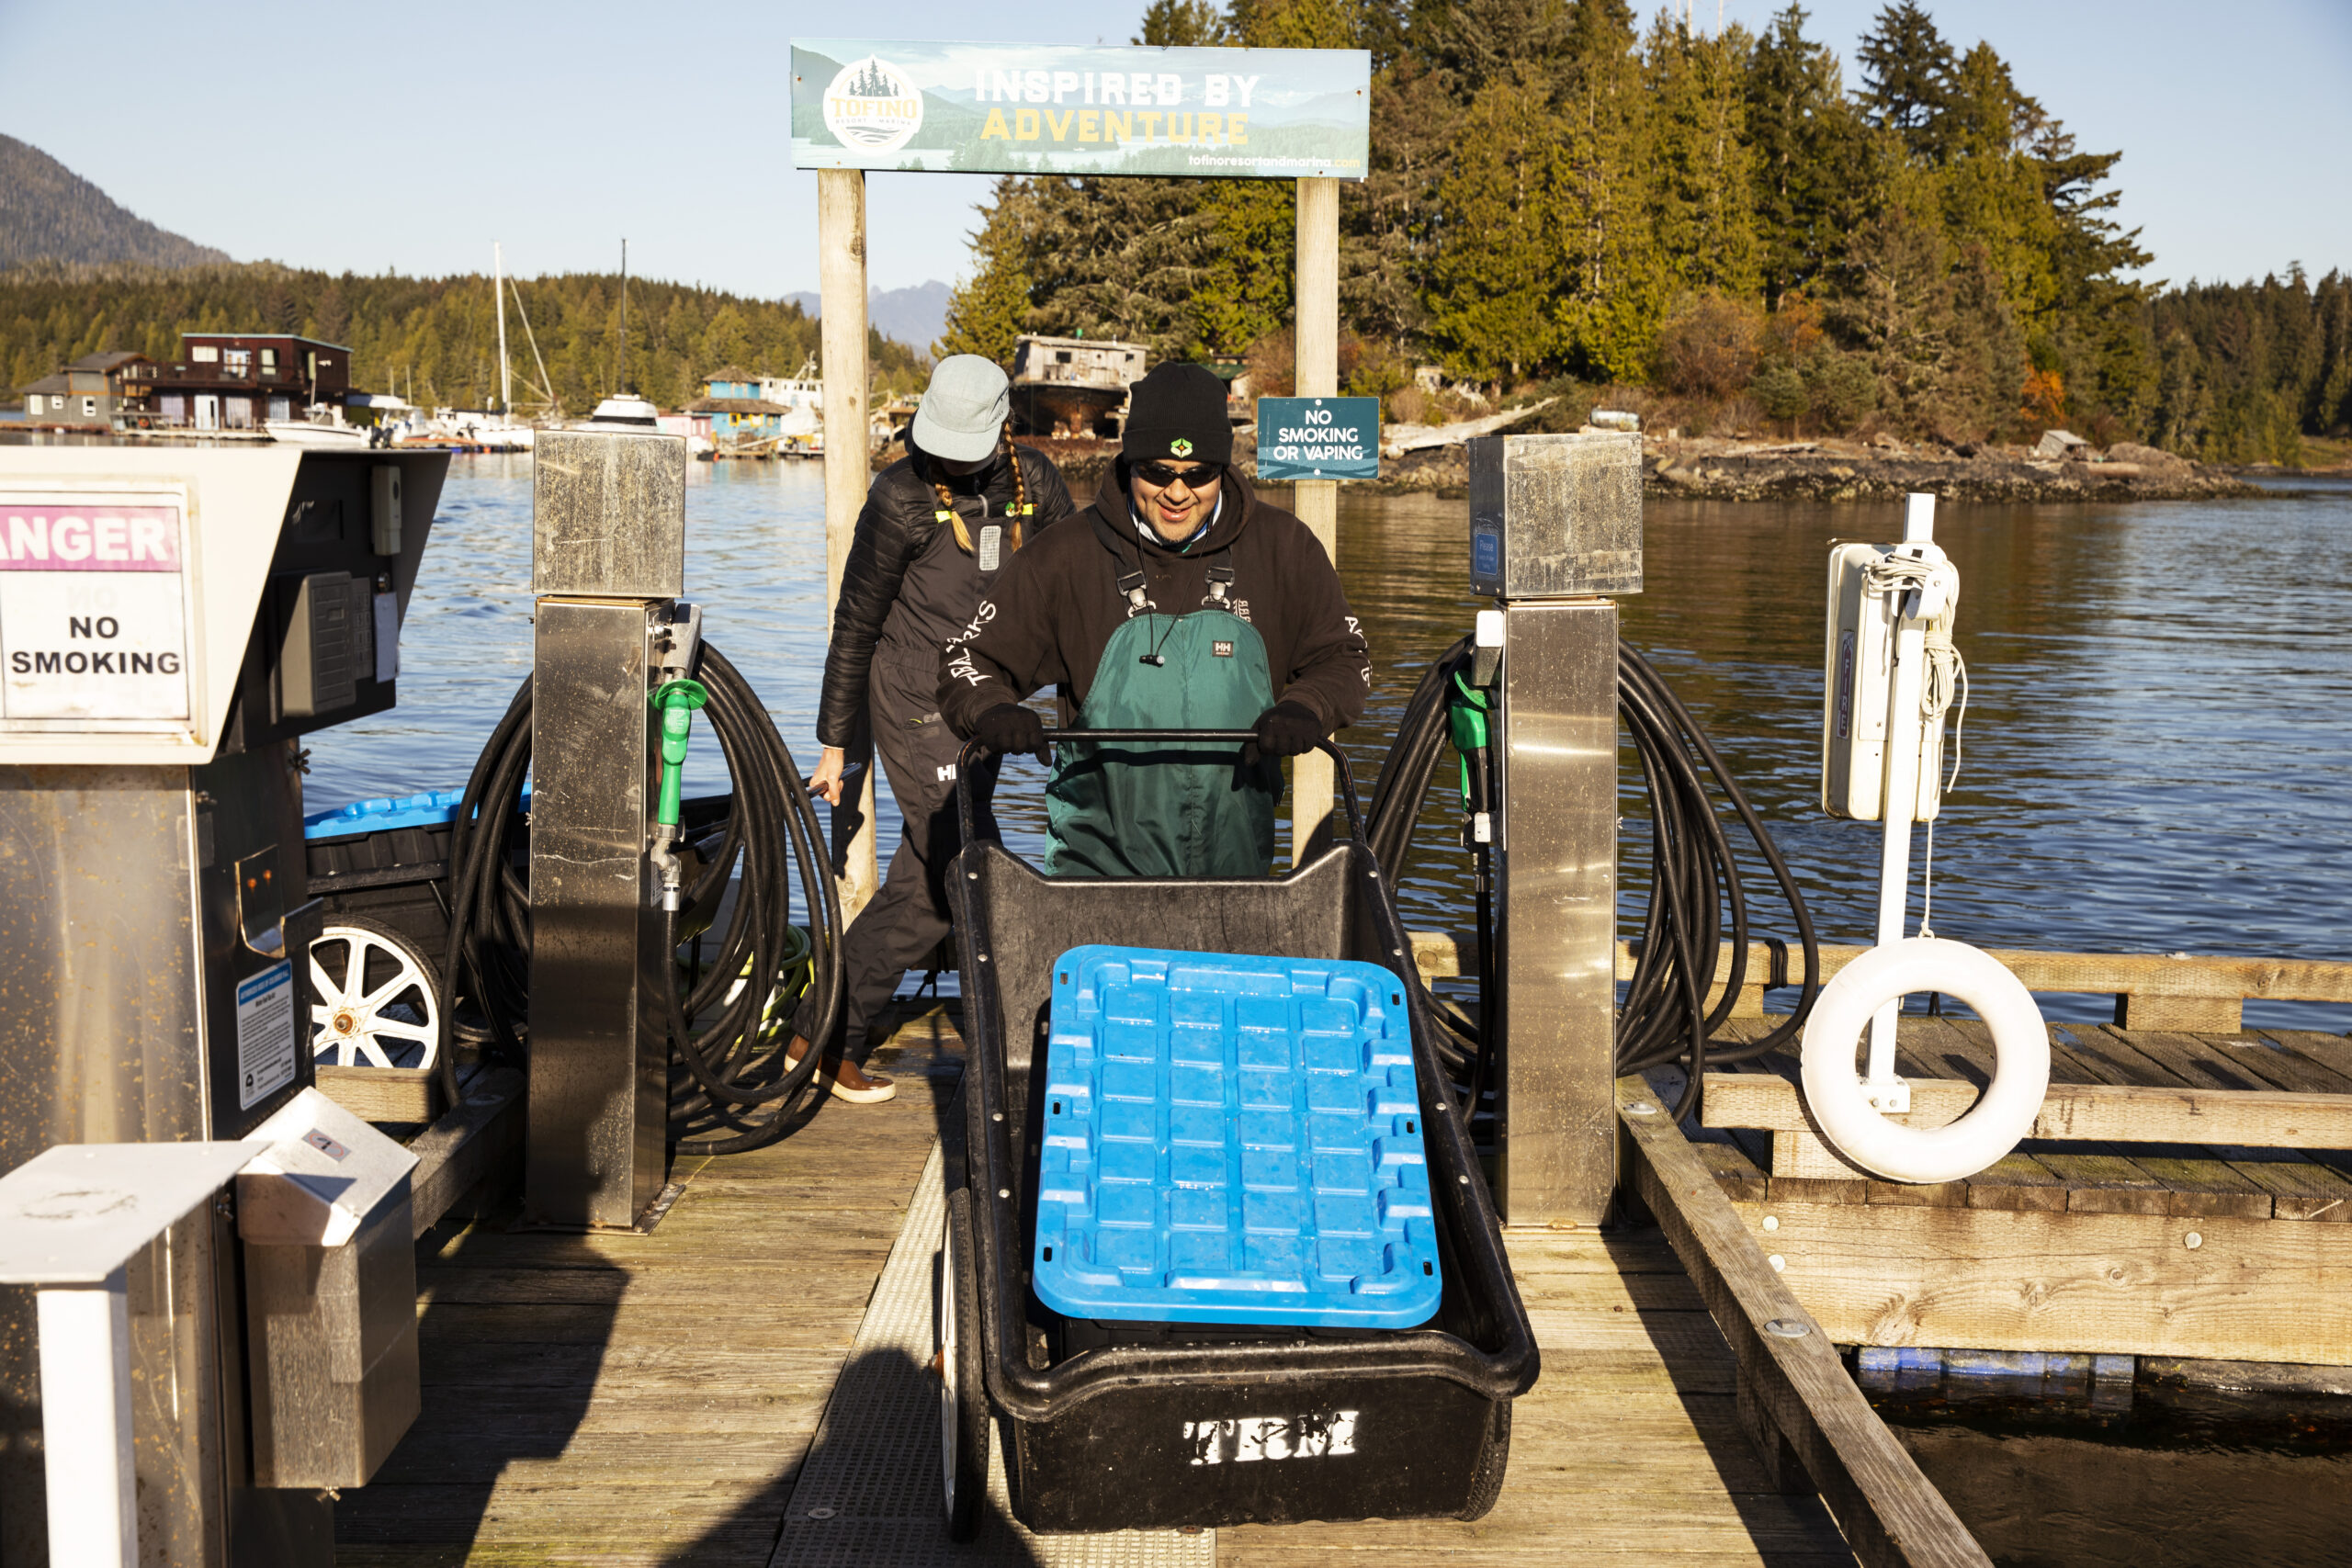 Coastal Restoration Society biologist Janessa Dornstauder and technician Joe Louie move a tote with a blue lid full of the European green crabs they collected in Bedwell Sound up the dock. The crabs are headed to the freezer.